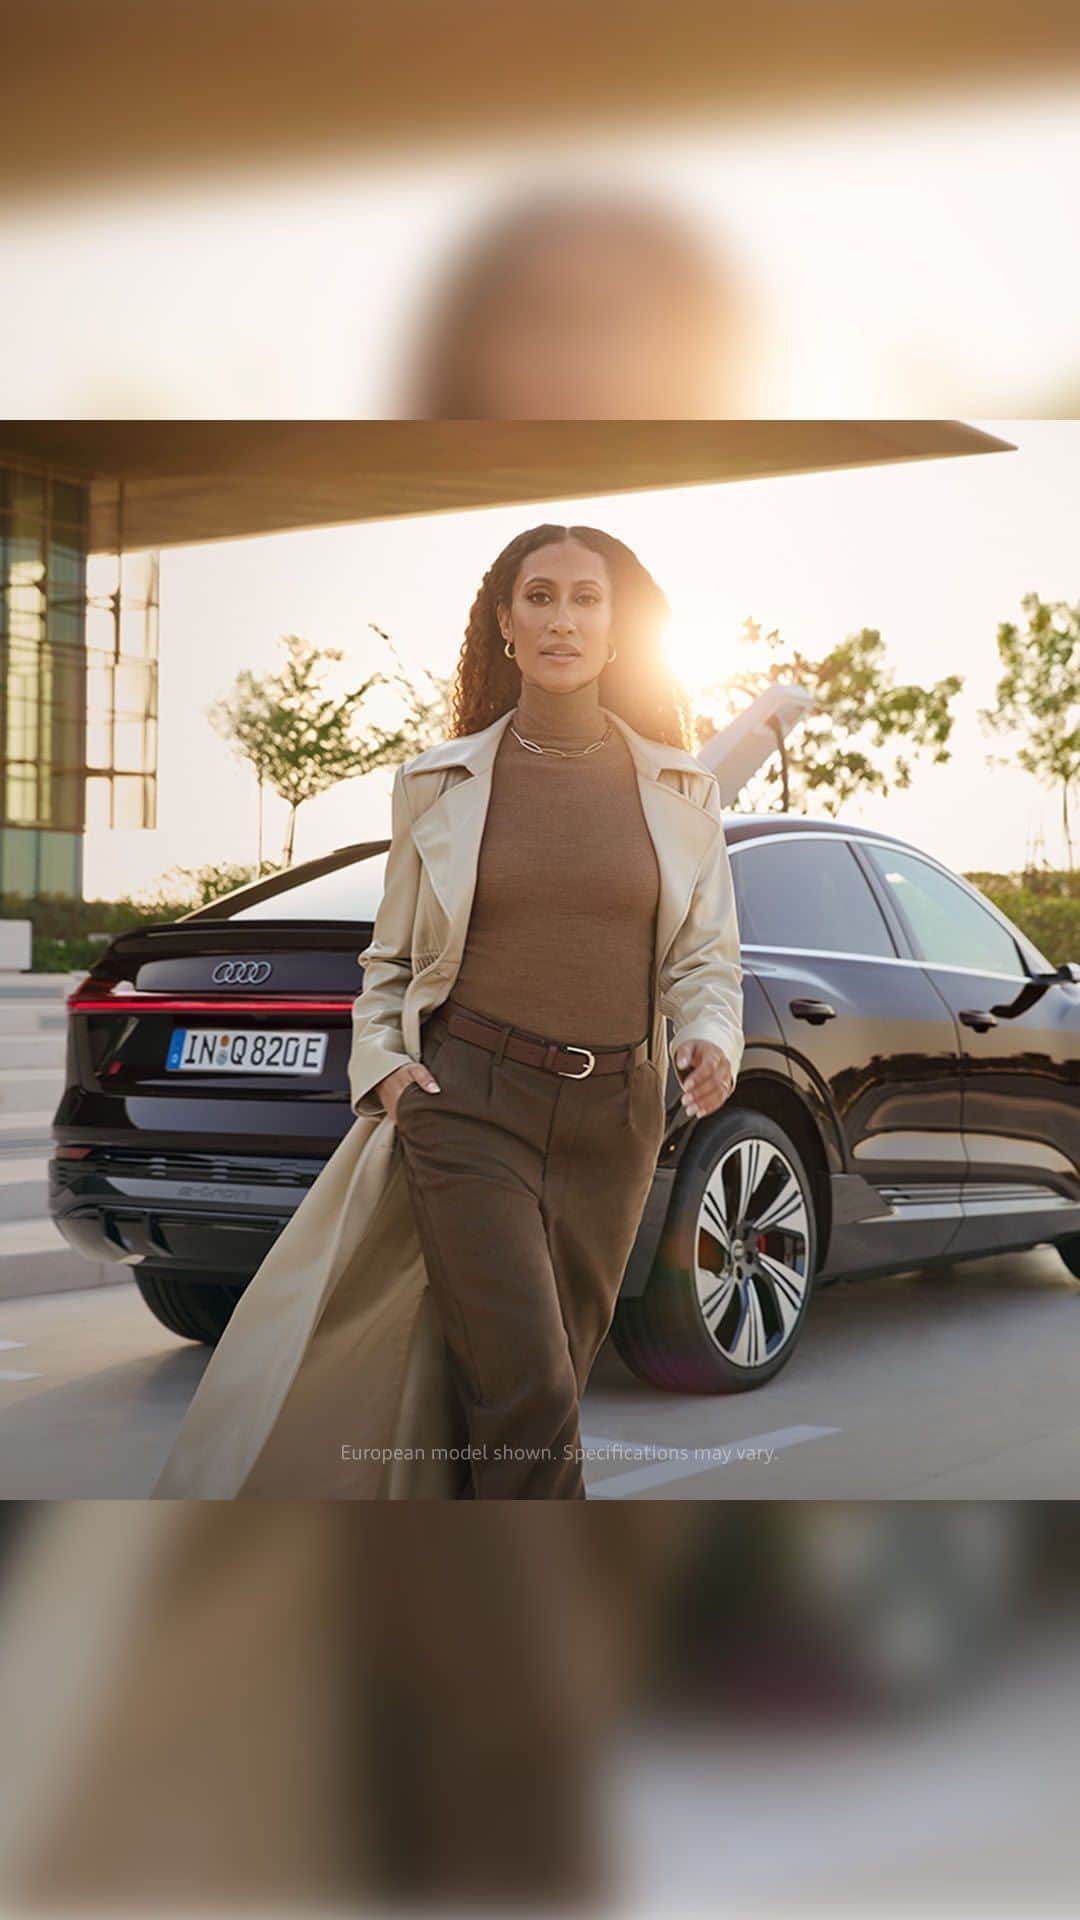 Audiのインスタグラム：「We are proud to introduce new #AudiPartner @ElaineWelteroth whose sophisticated style and trailblazing work as an award-winning journalist, bestselling author, and TV host embodies the elegance in innovation of the new fully electric Audi Q8 Sportback e-tron. Visit the link in the @Audi bio to learn more about our new chapter and the Audi Q8 e-tron models. #FutureIsAnAttitude #Q8etron #emobility」